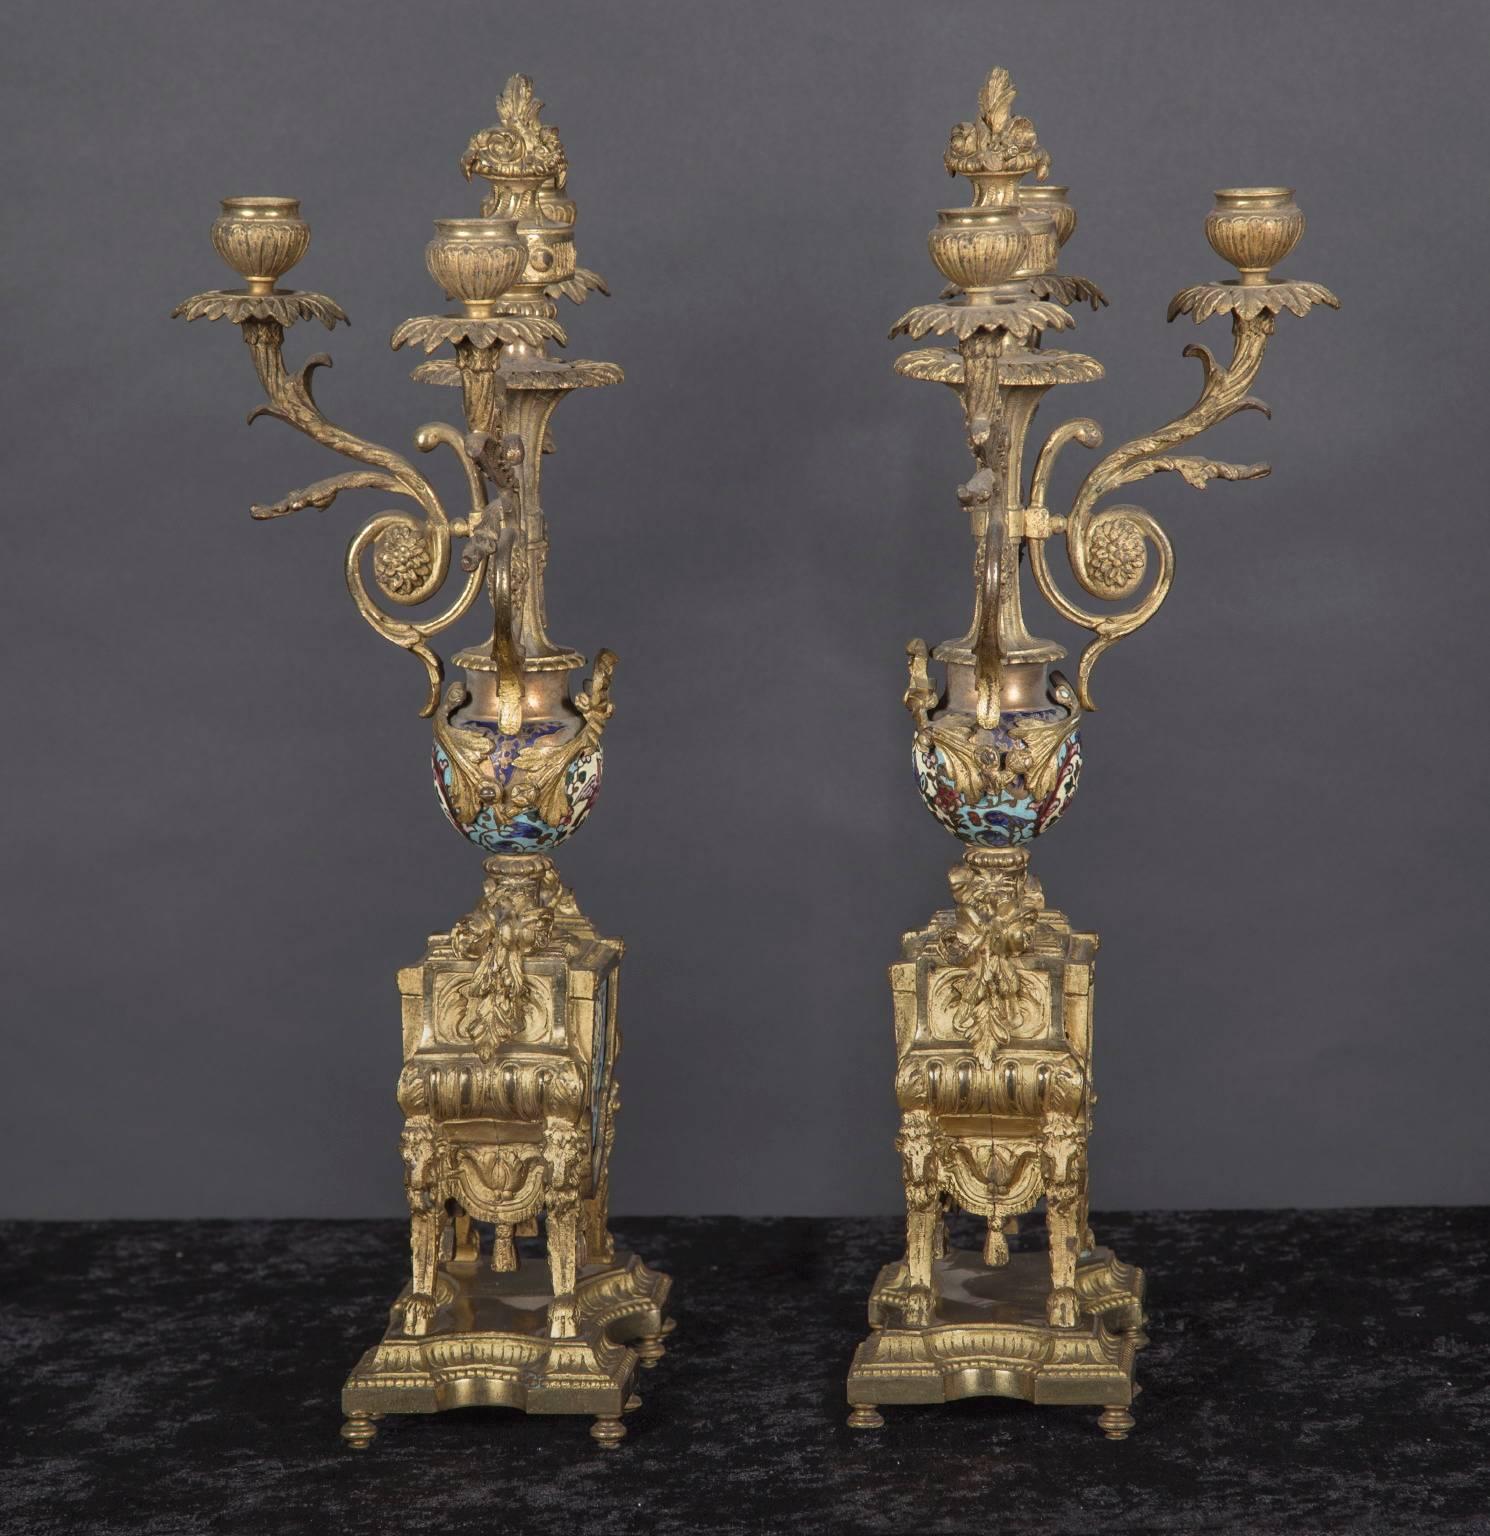 French 19th Century Bronze and Champleve Candelabras  In Excellent Condition For Sale In New Orleans, LA